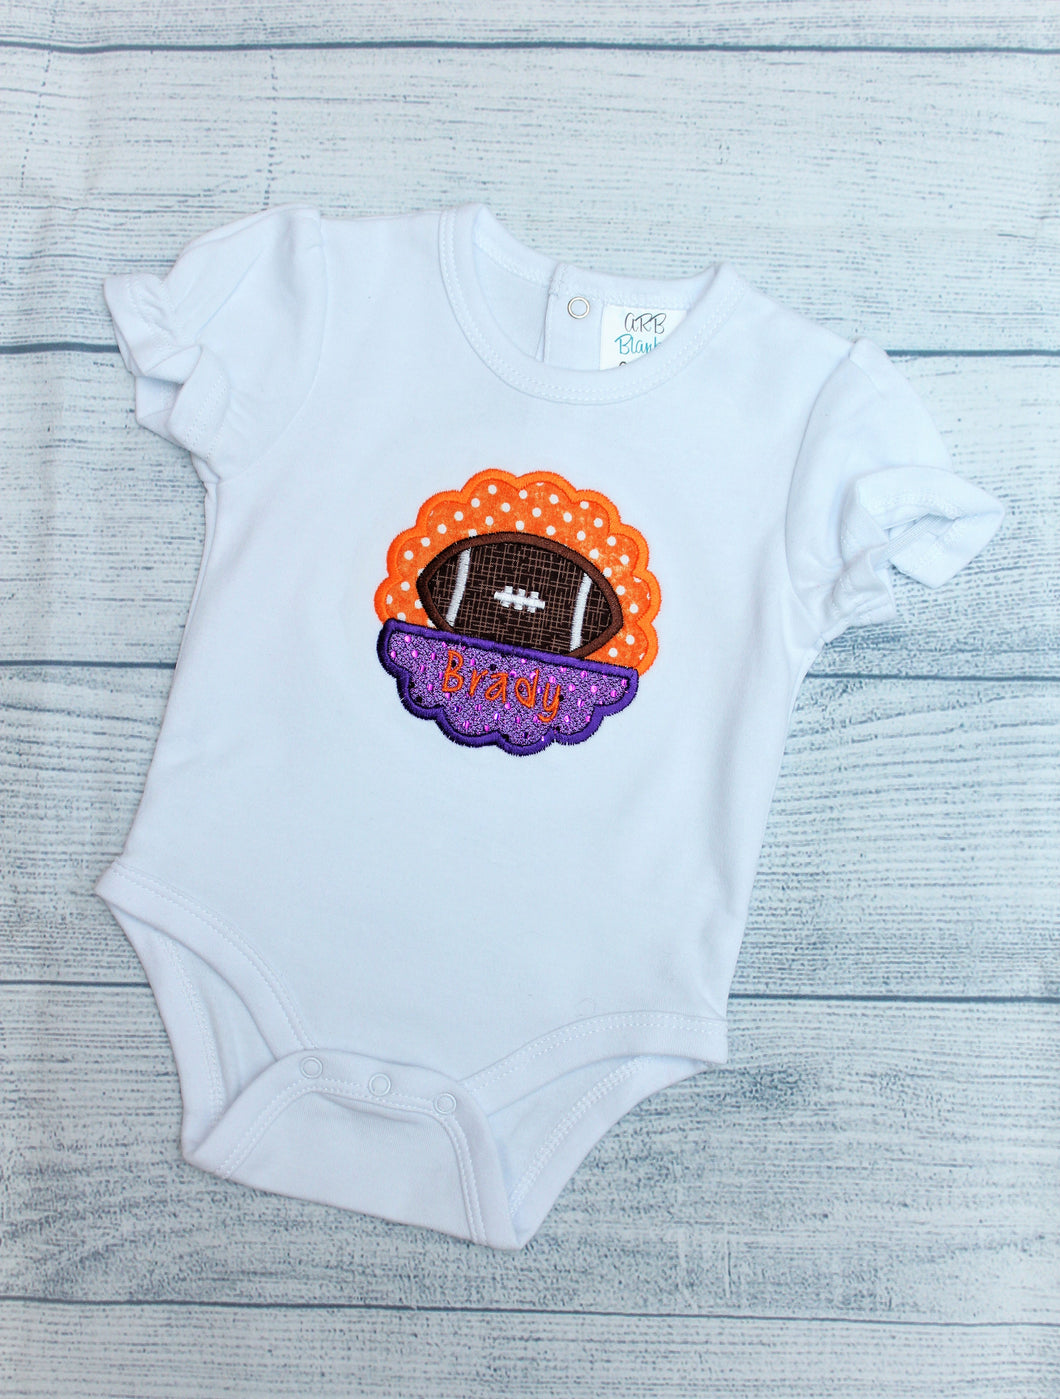 cute-football-onesie-baby-s-first-fall-pictures-sports-fan-custom-tops-for-kids